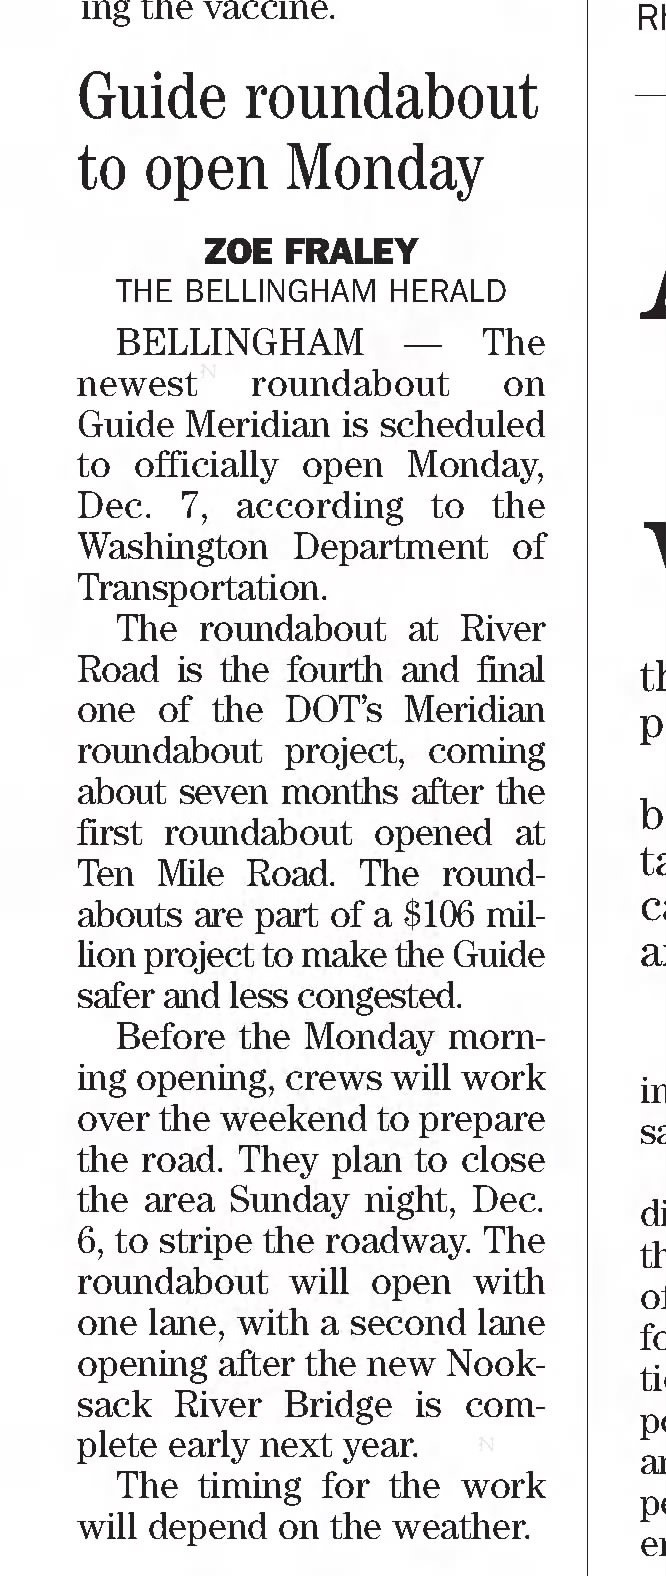 Guide roundabout to open Monday